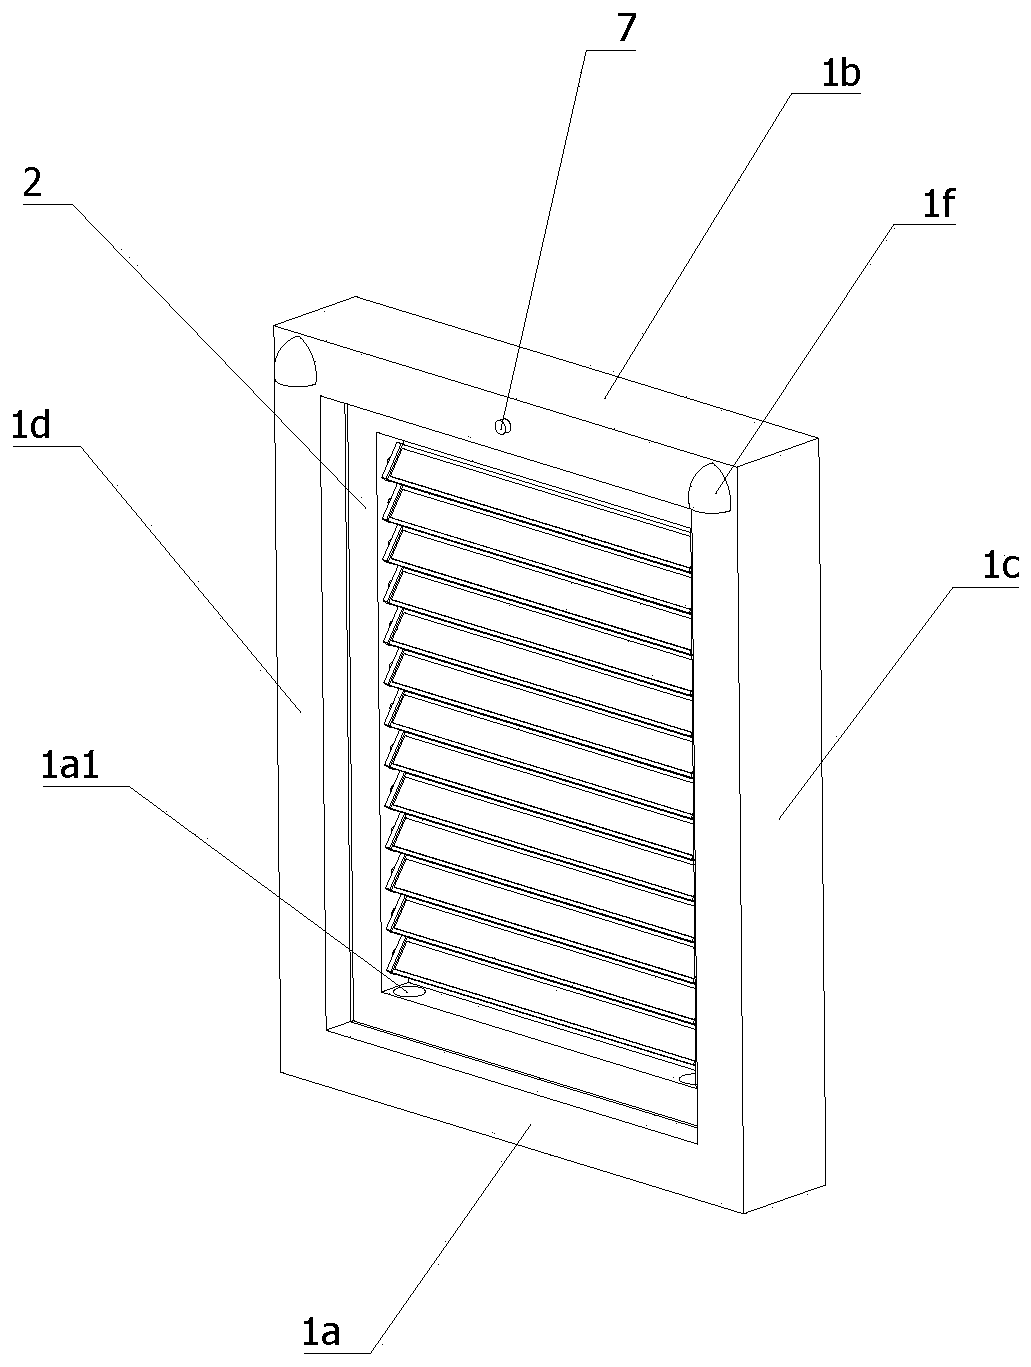 Curtain wall glass frame structure with building curtain wall ventilation function